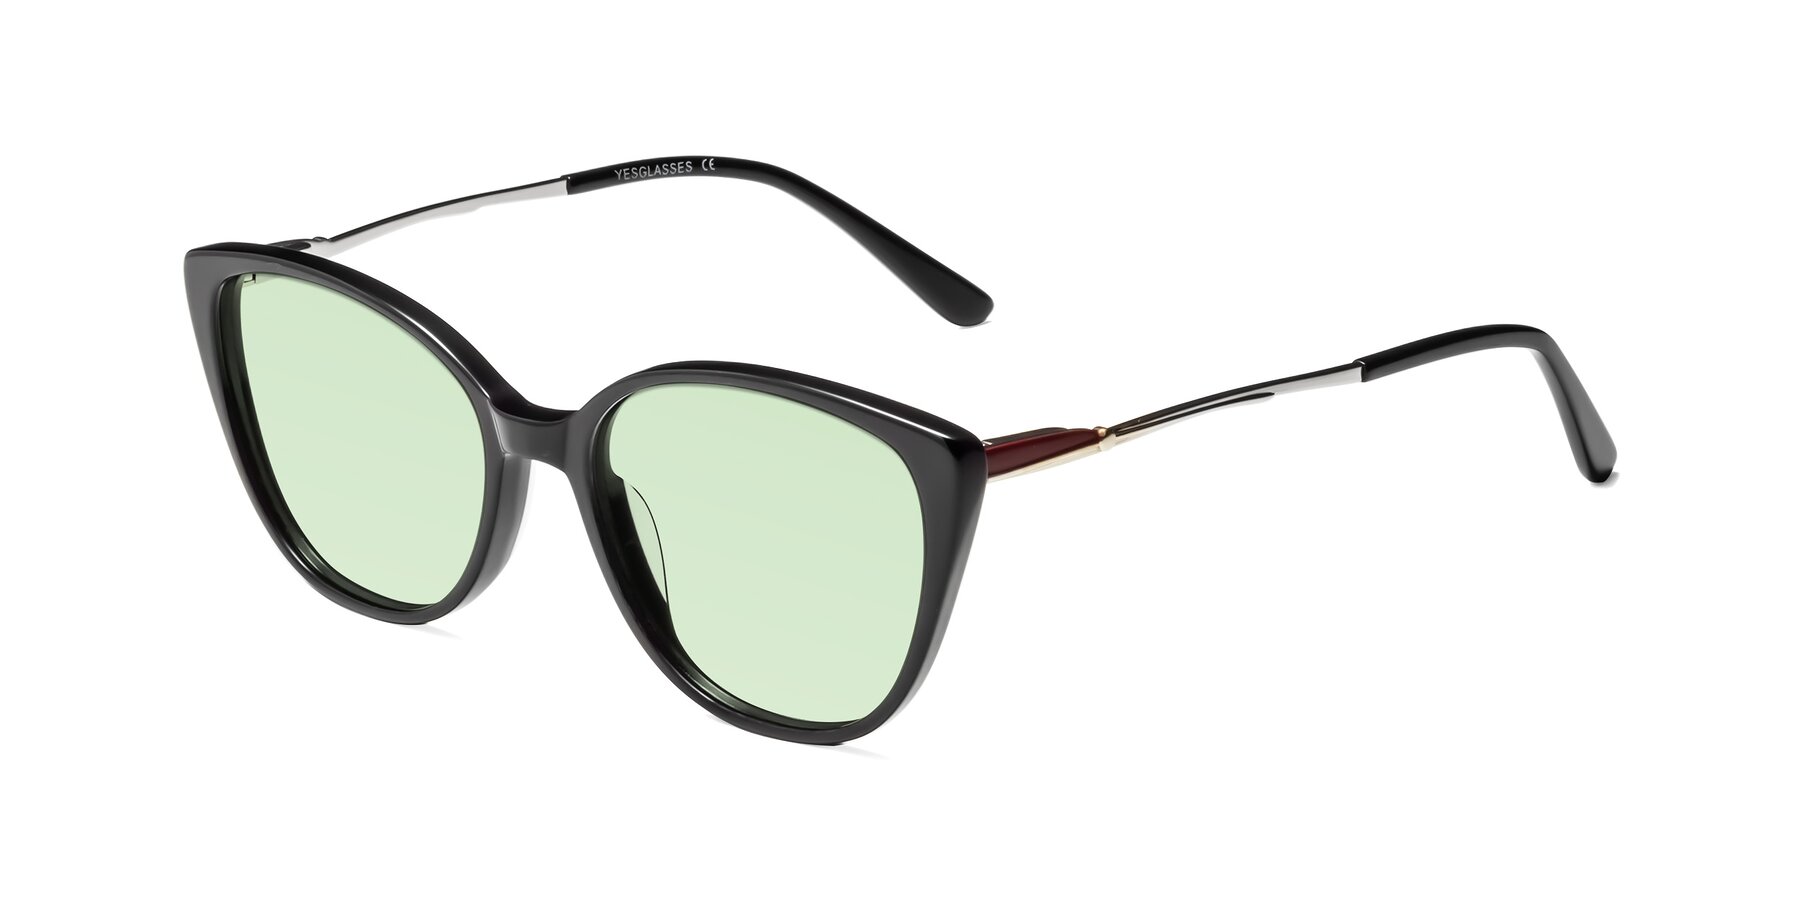 Angle of 17424 in Black with Light Green Tinted Lenses